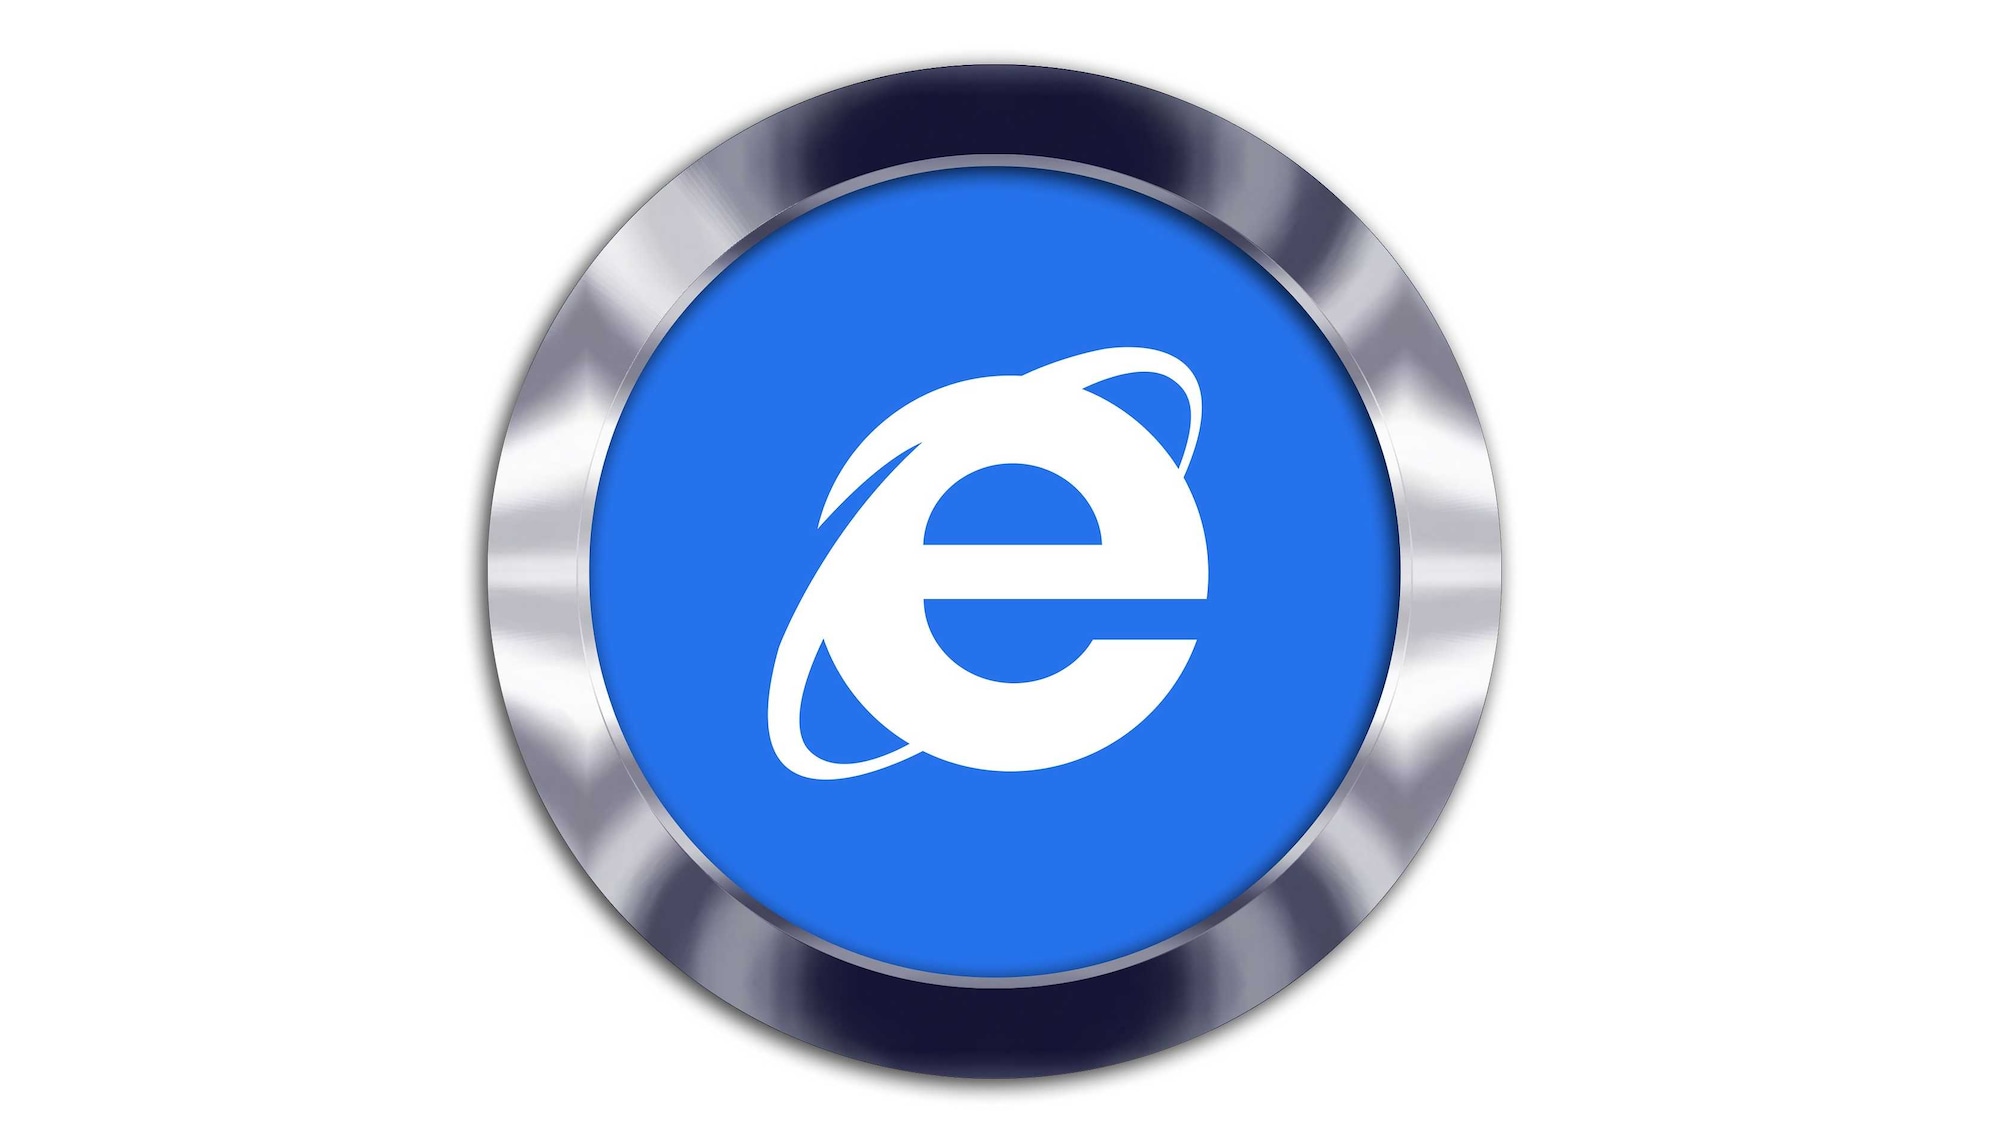 Microsoft says its support to Edge browser's IE mode will continue at least until the end of 2029. Image: Pete Linforth from Pixabay 